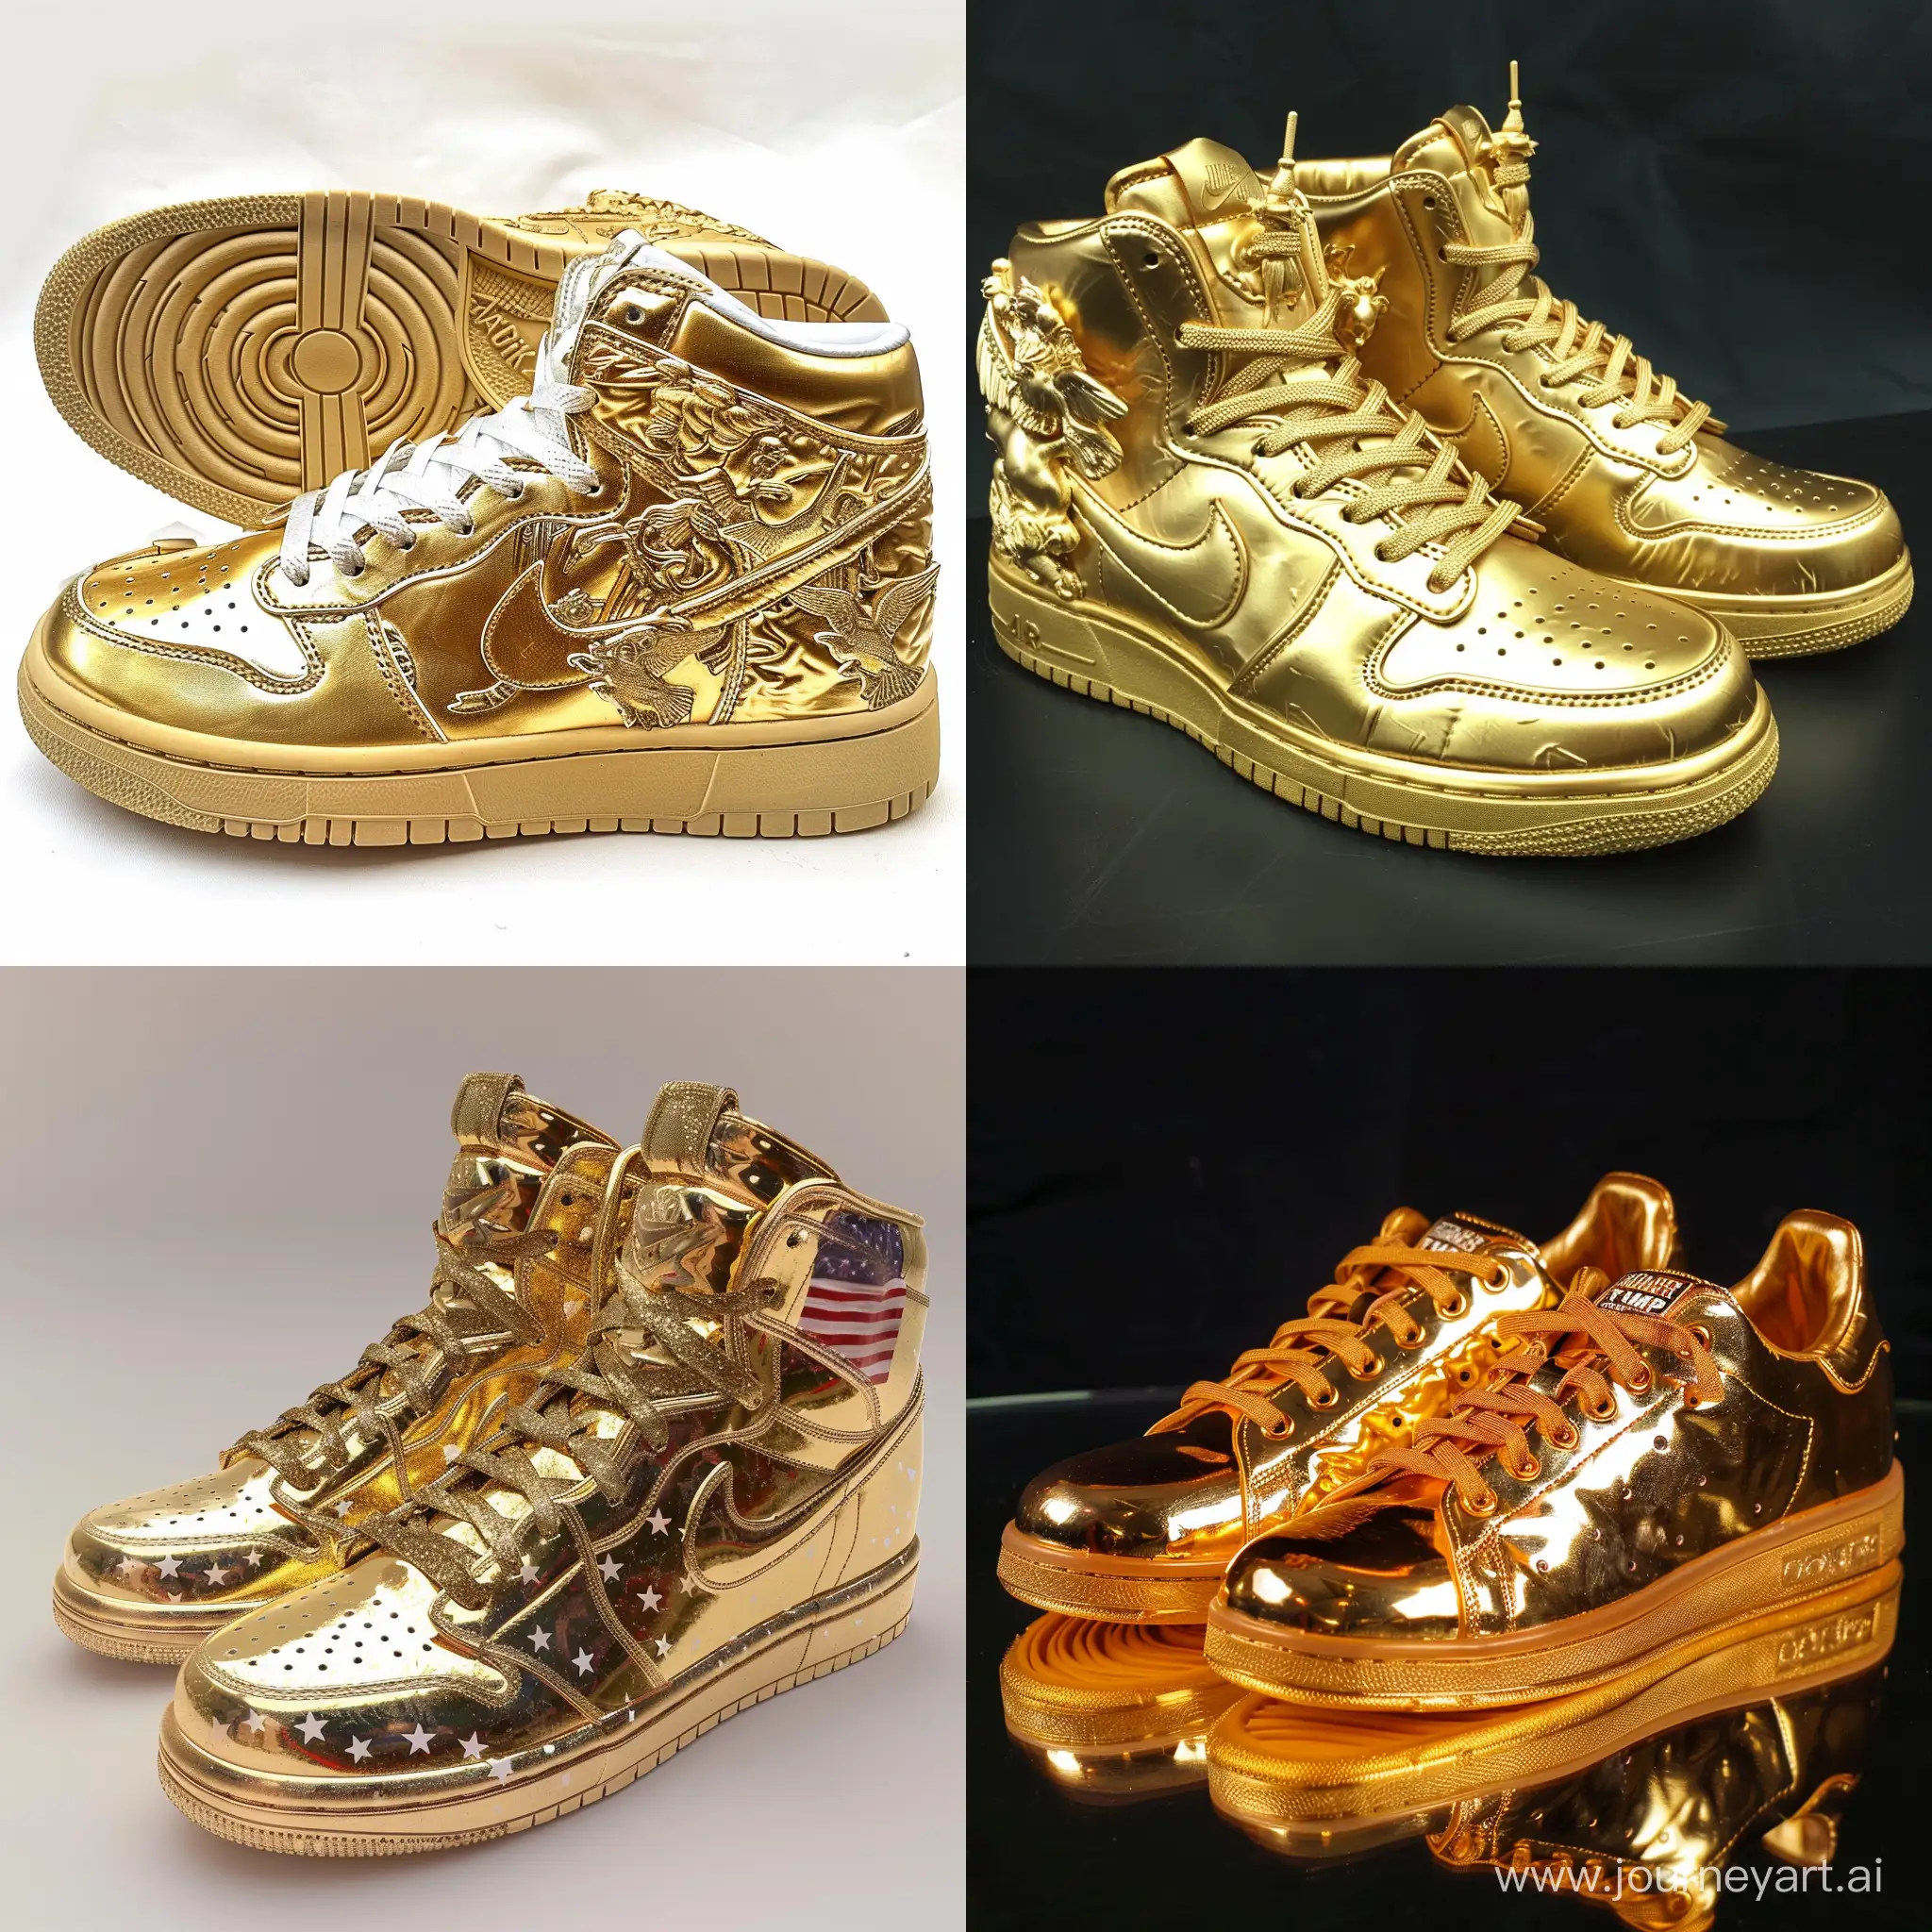 Golden-American-Sneakers-Designed-by-Donald-Trump